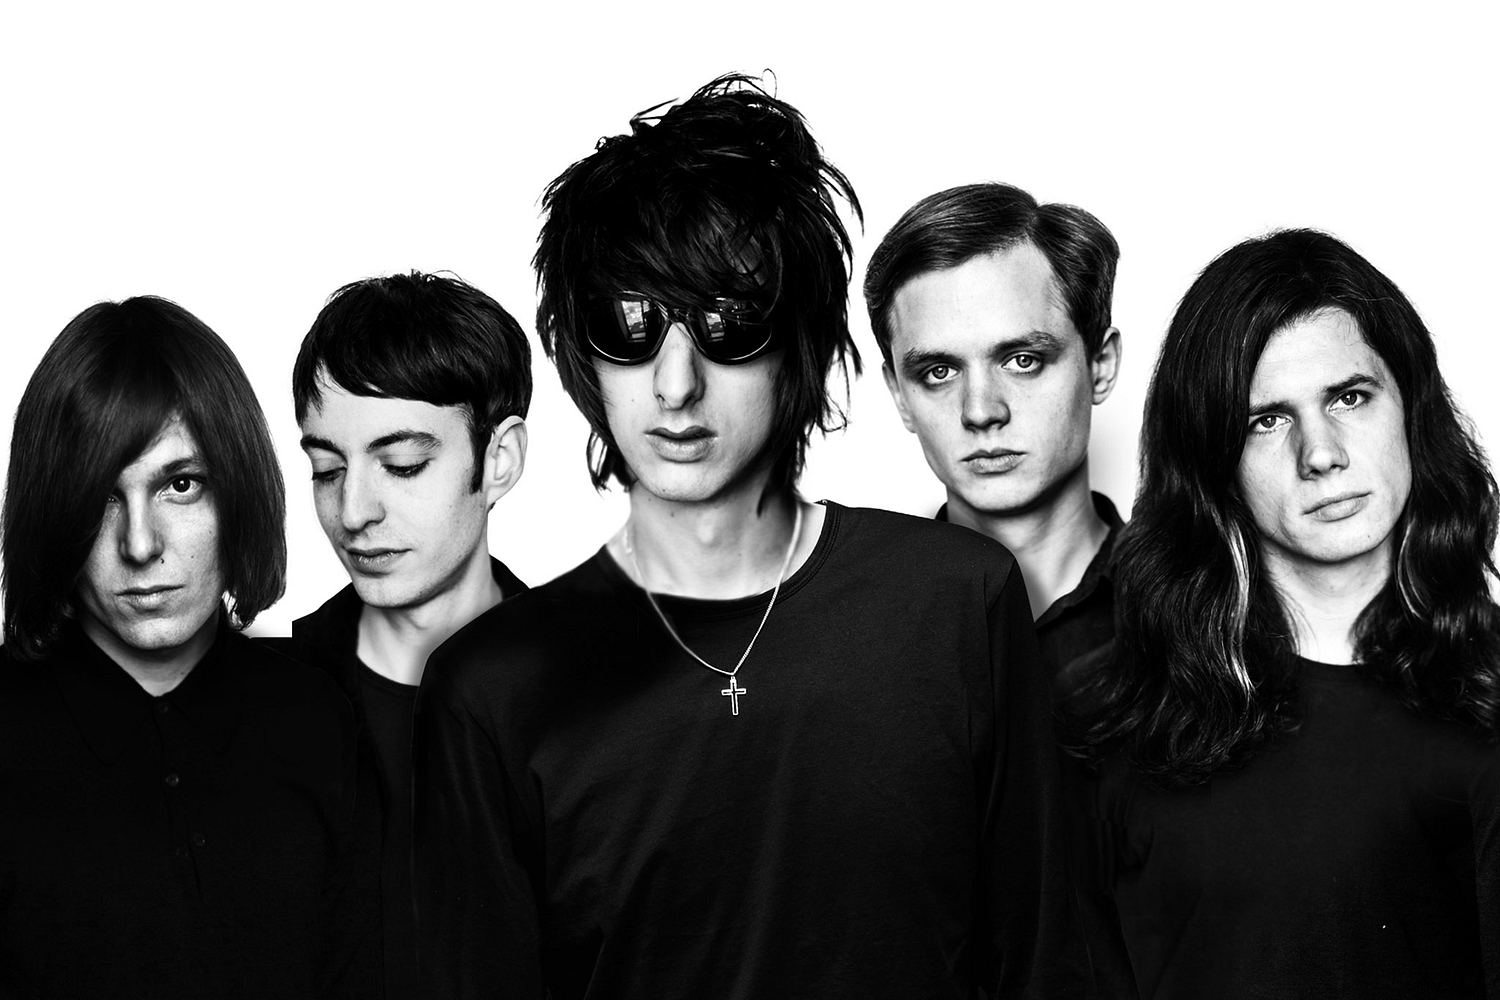 The Horrors: “The first time I came, I arrived without a ticket”